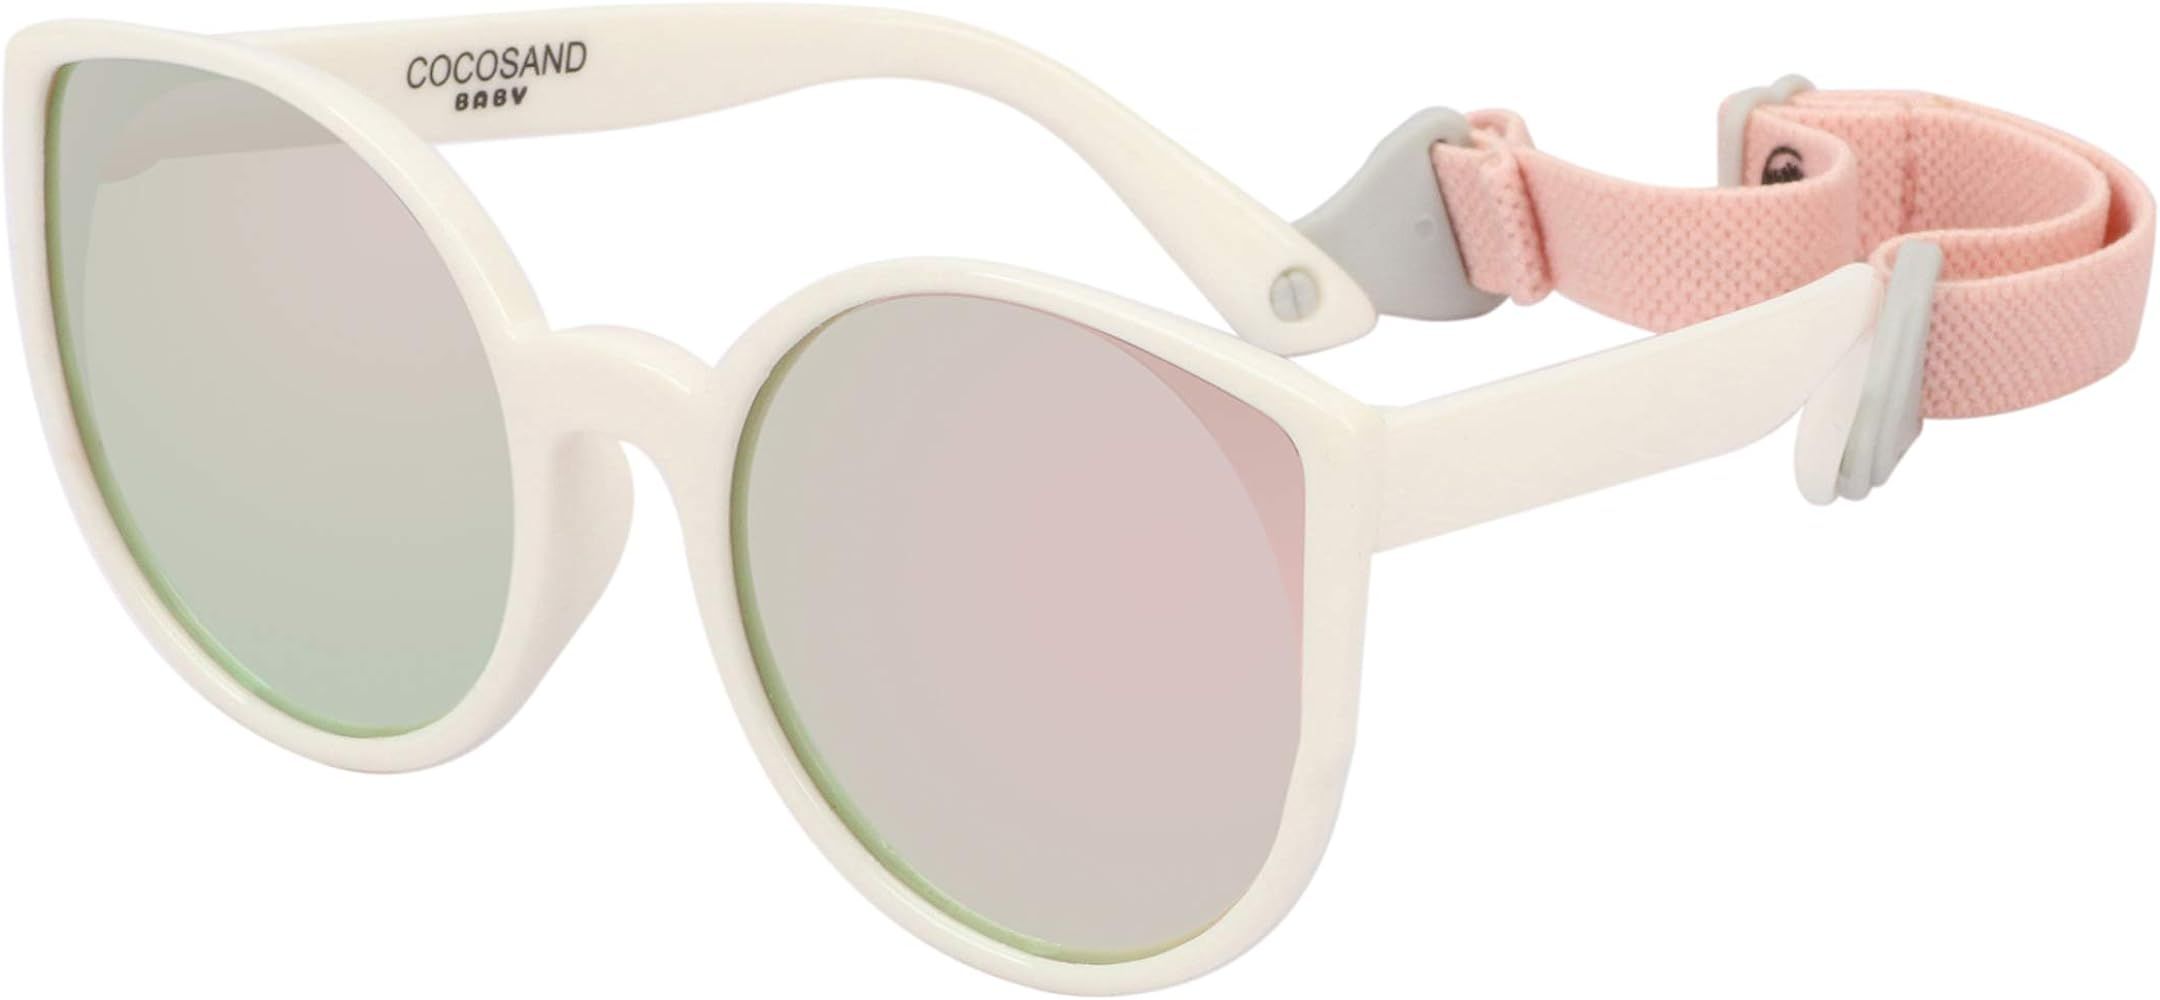 COCOSAND Baby Sunglasses with Strap Cateye Style UV400 Protection for Age 0-24months | Amazon (US)